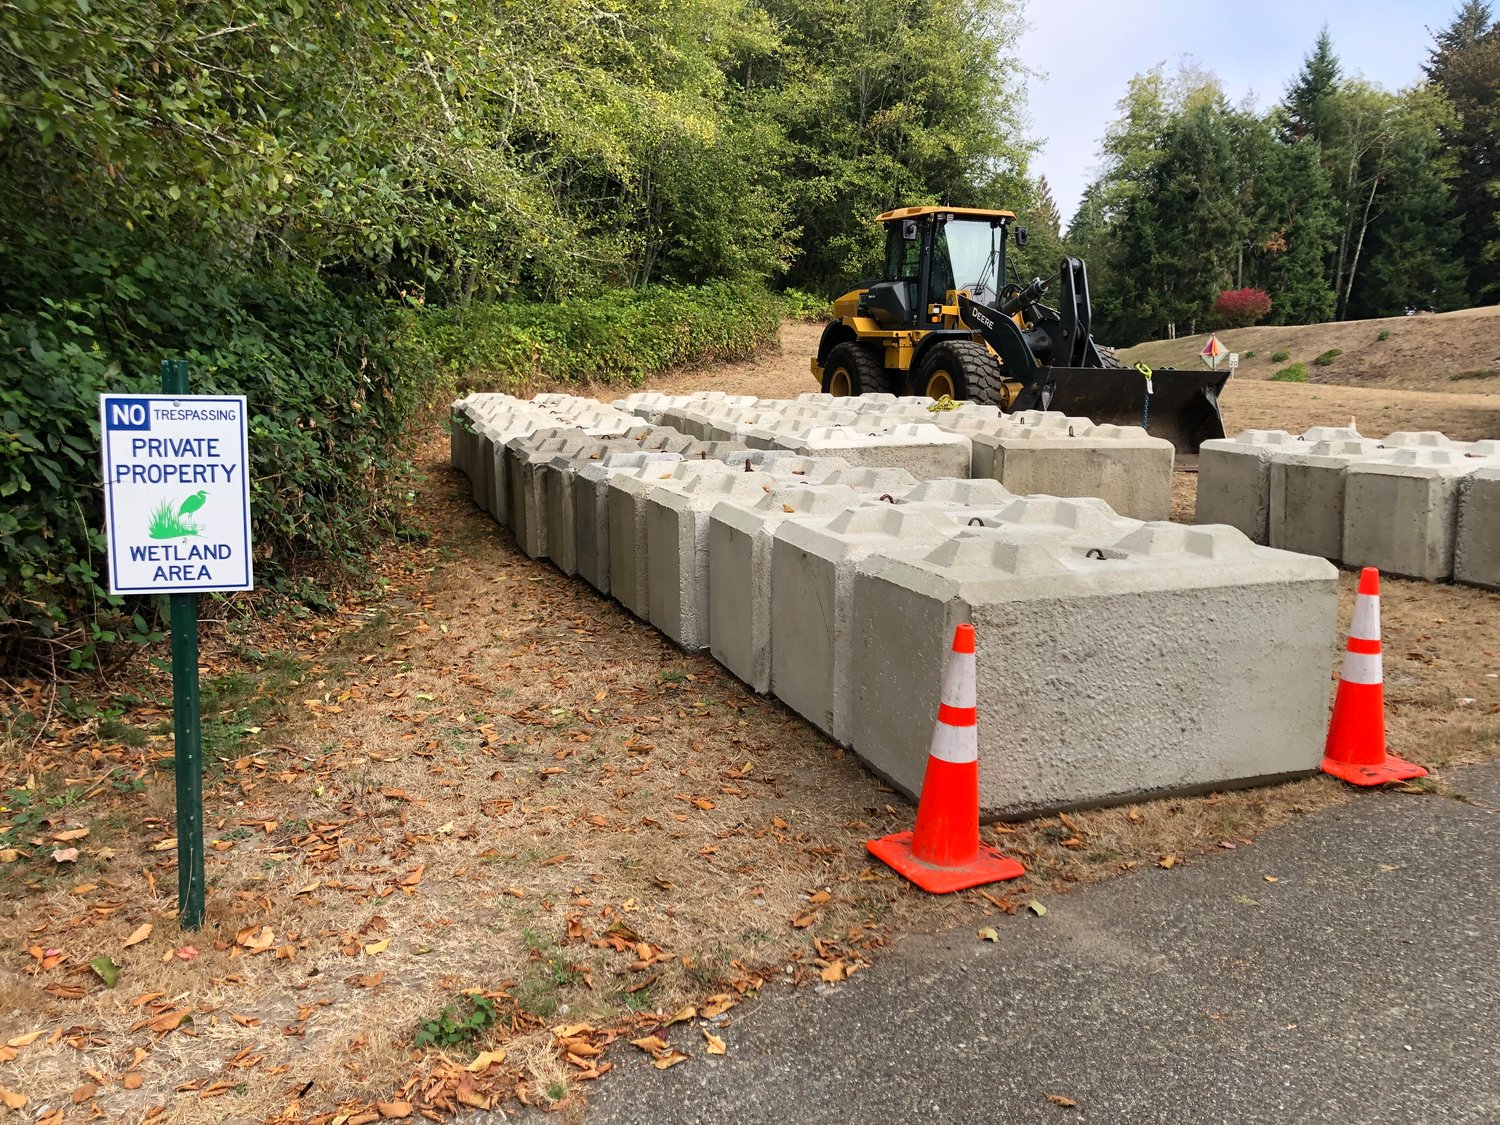 These "ecological blocks" are staged on Ensign Road, across the street from the remaining homeless encampment there, in this photo taken on October 3, 2022.